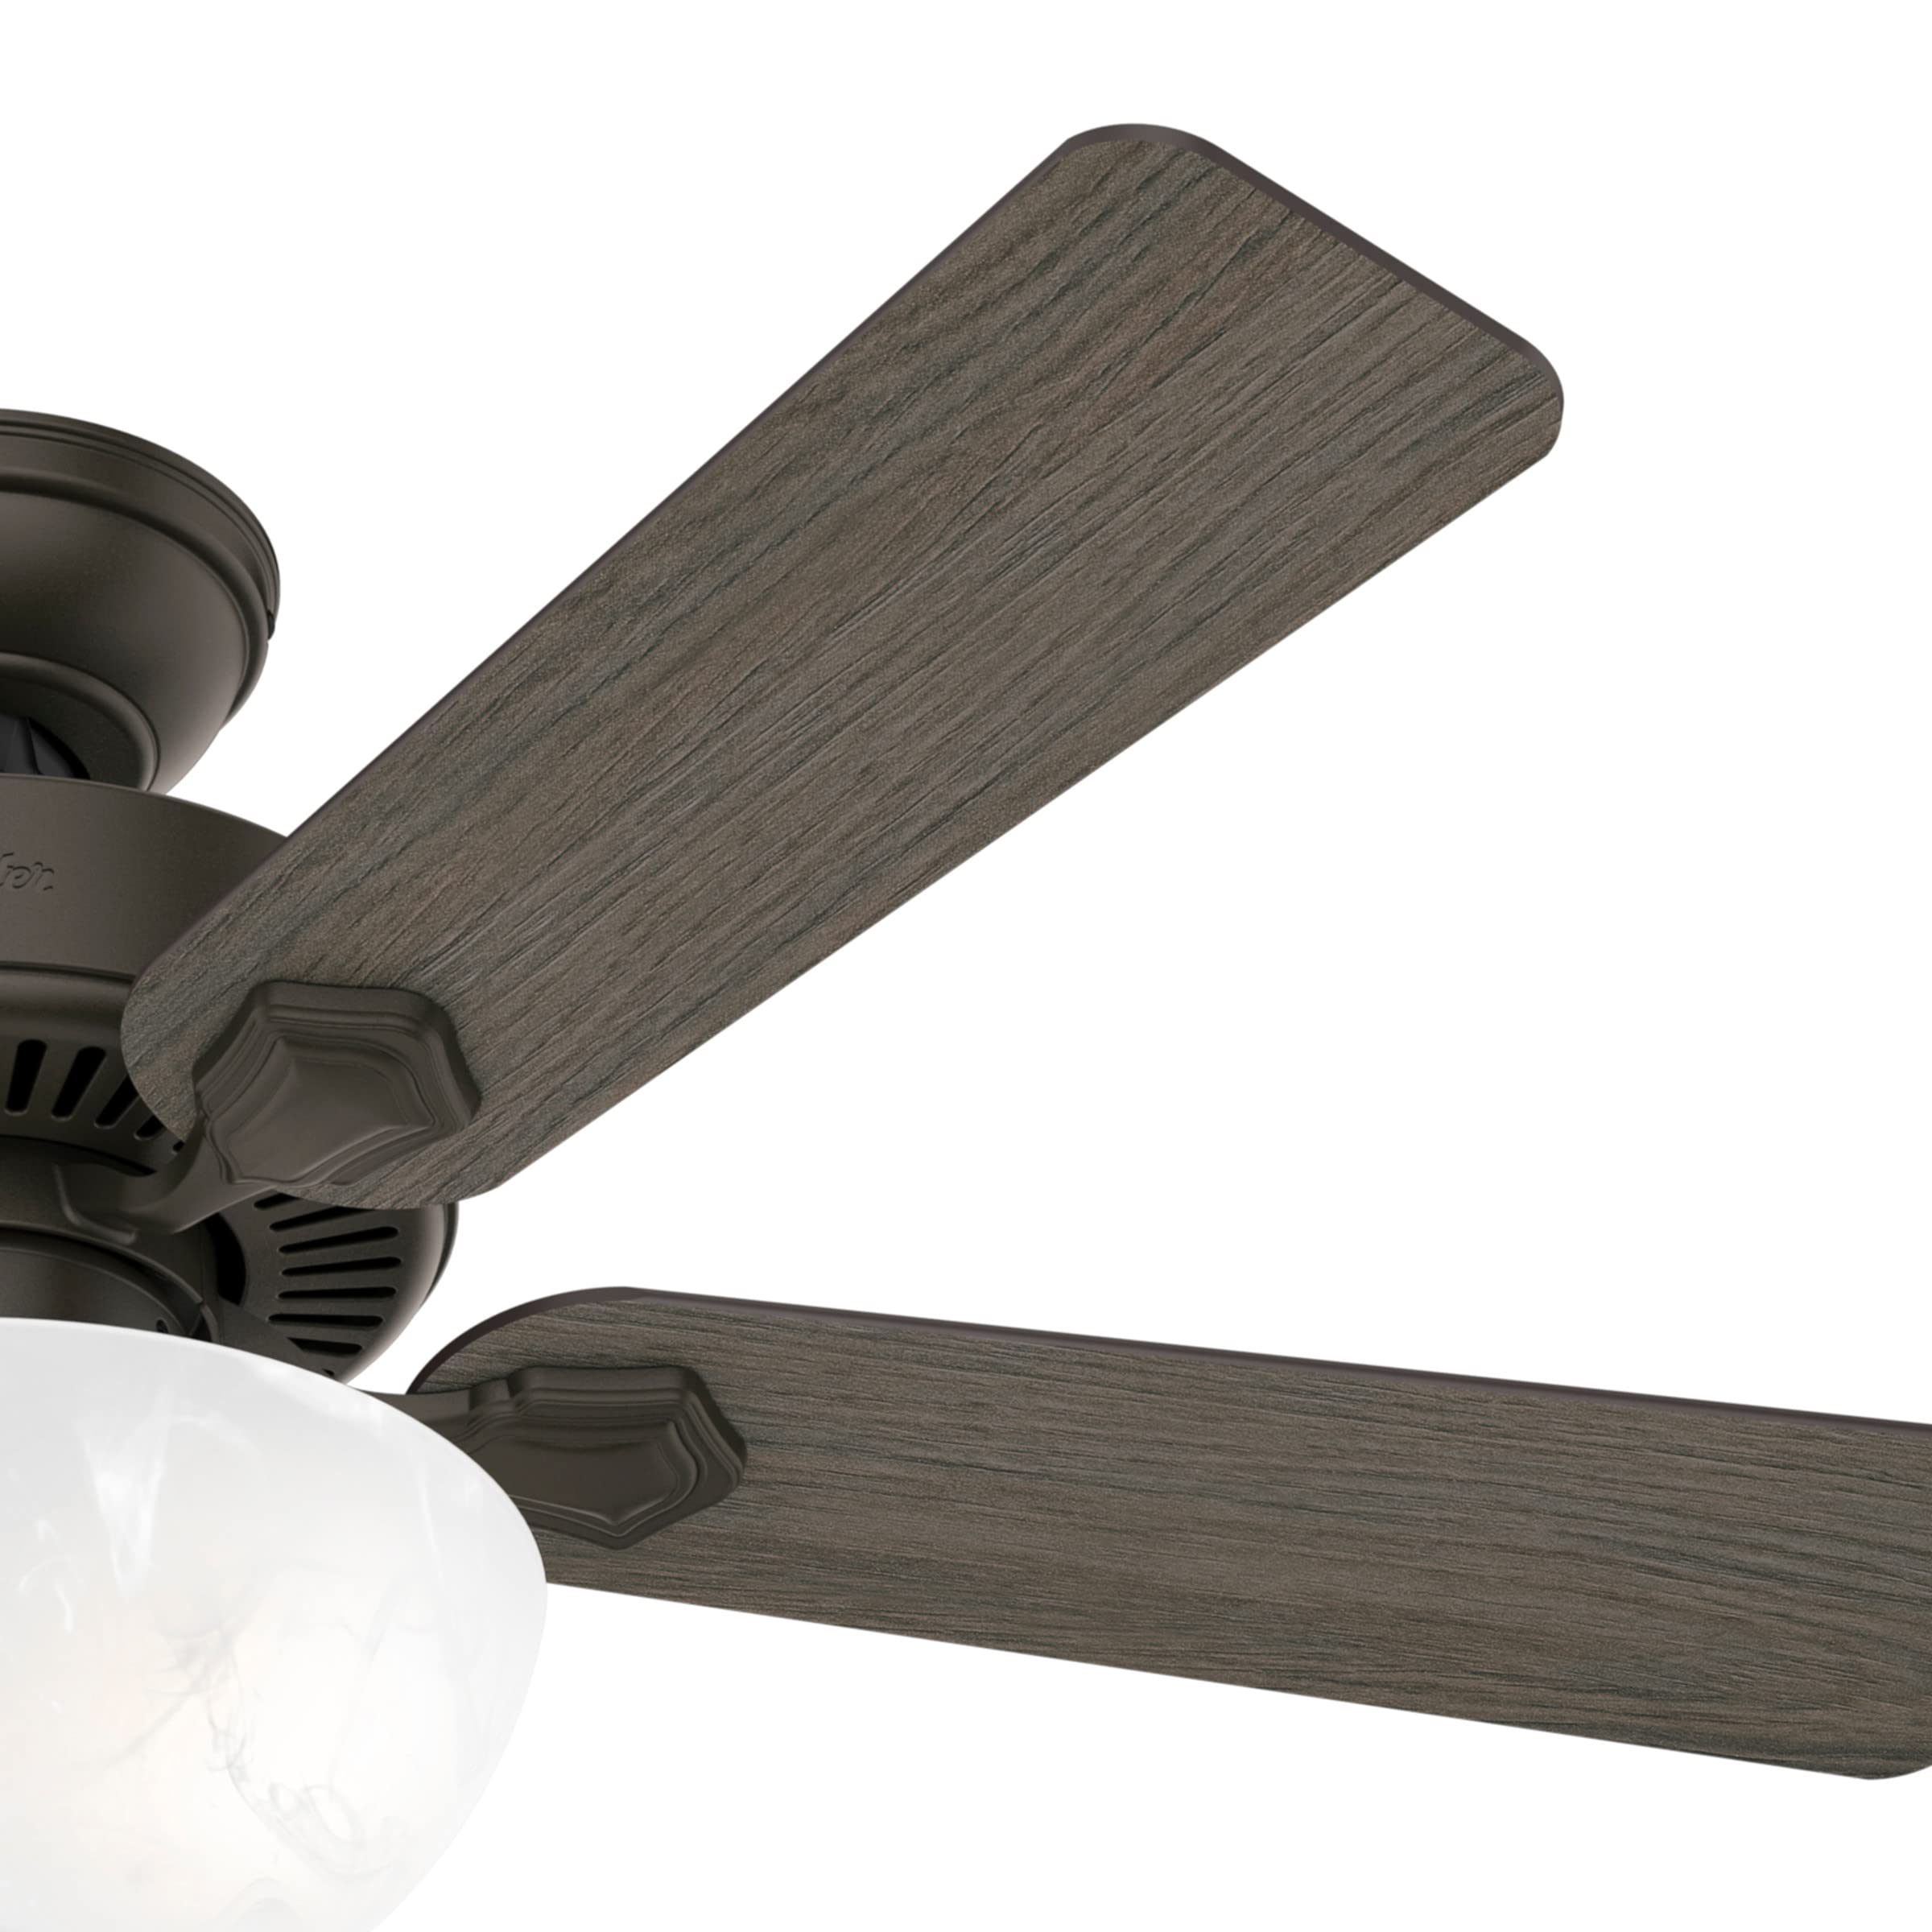 Hunter Swanson 44-inch Indoor New Bronze Casual Ceiling Fan With Bright LED Light Kit, Pull Chains, and Reversible WhisperWind Motor Included